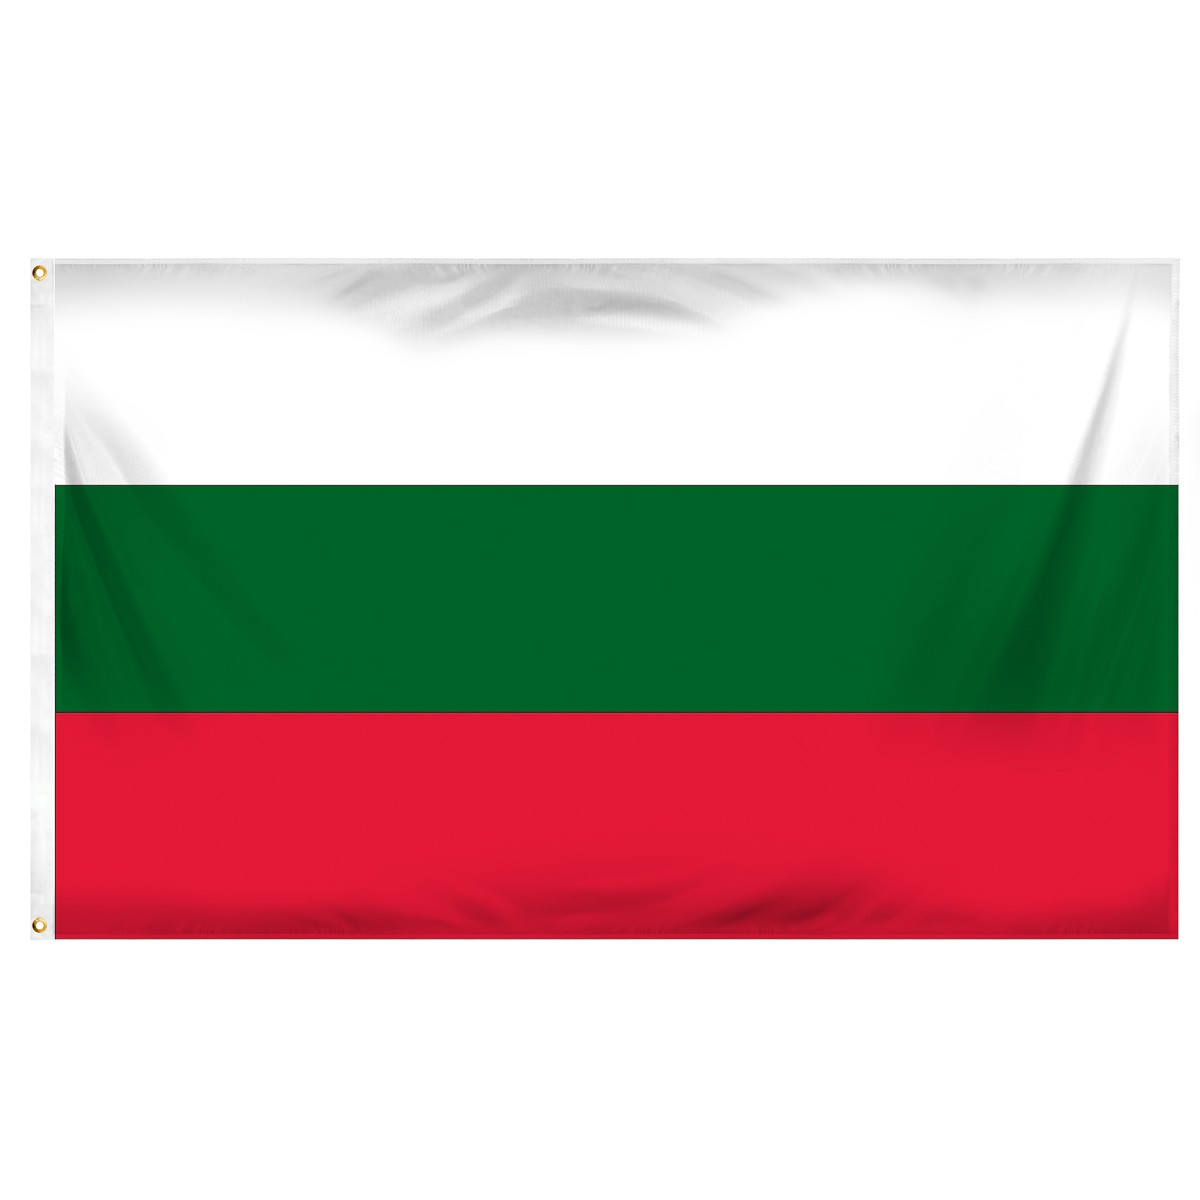 Bulgaria Building Pennants and Flags